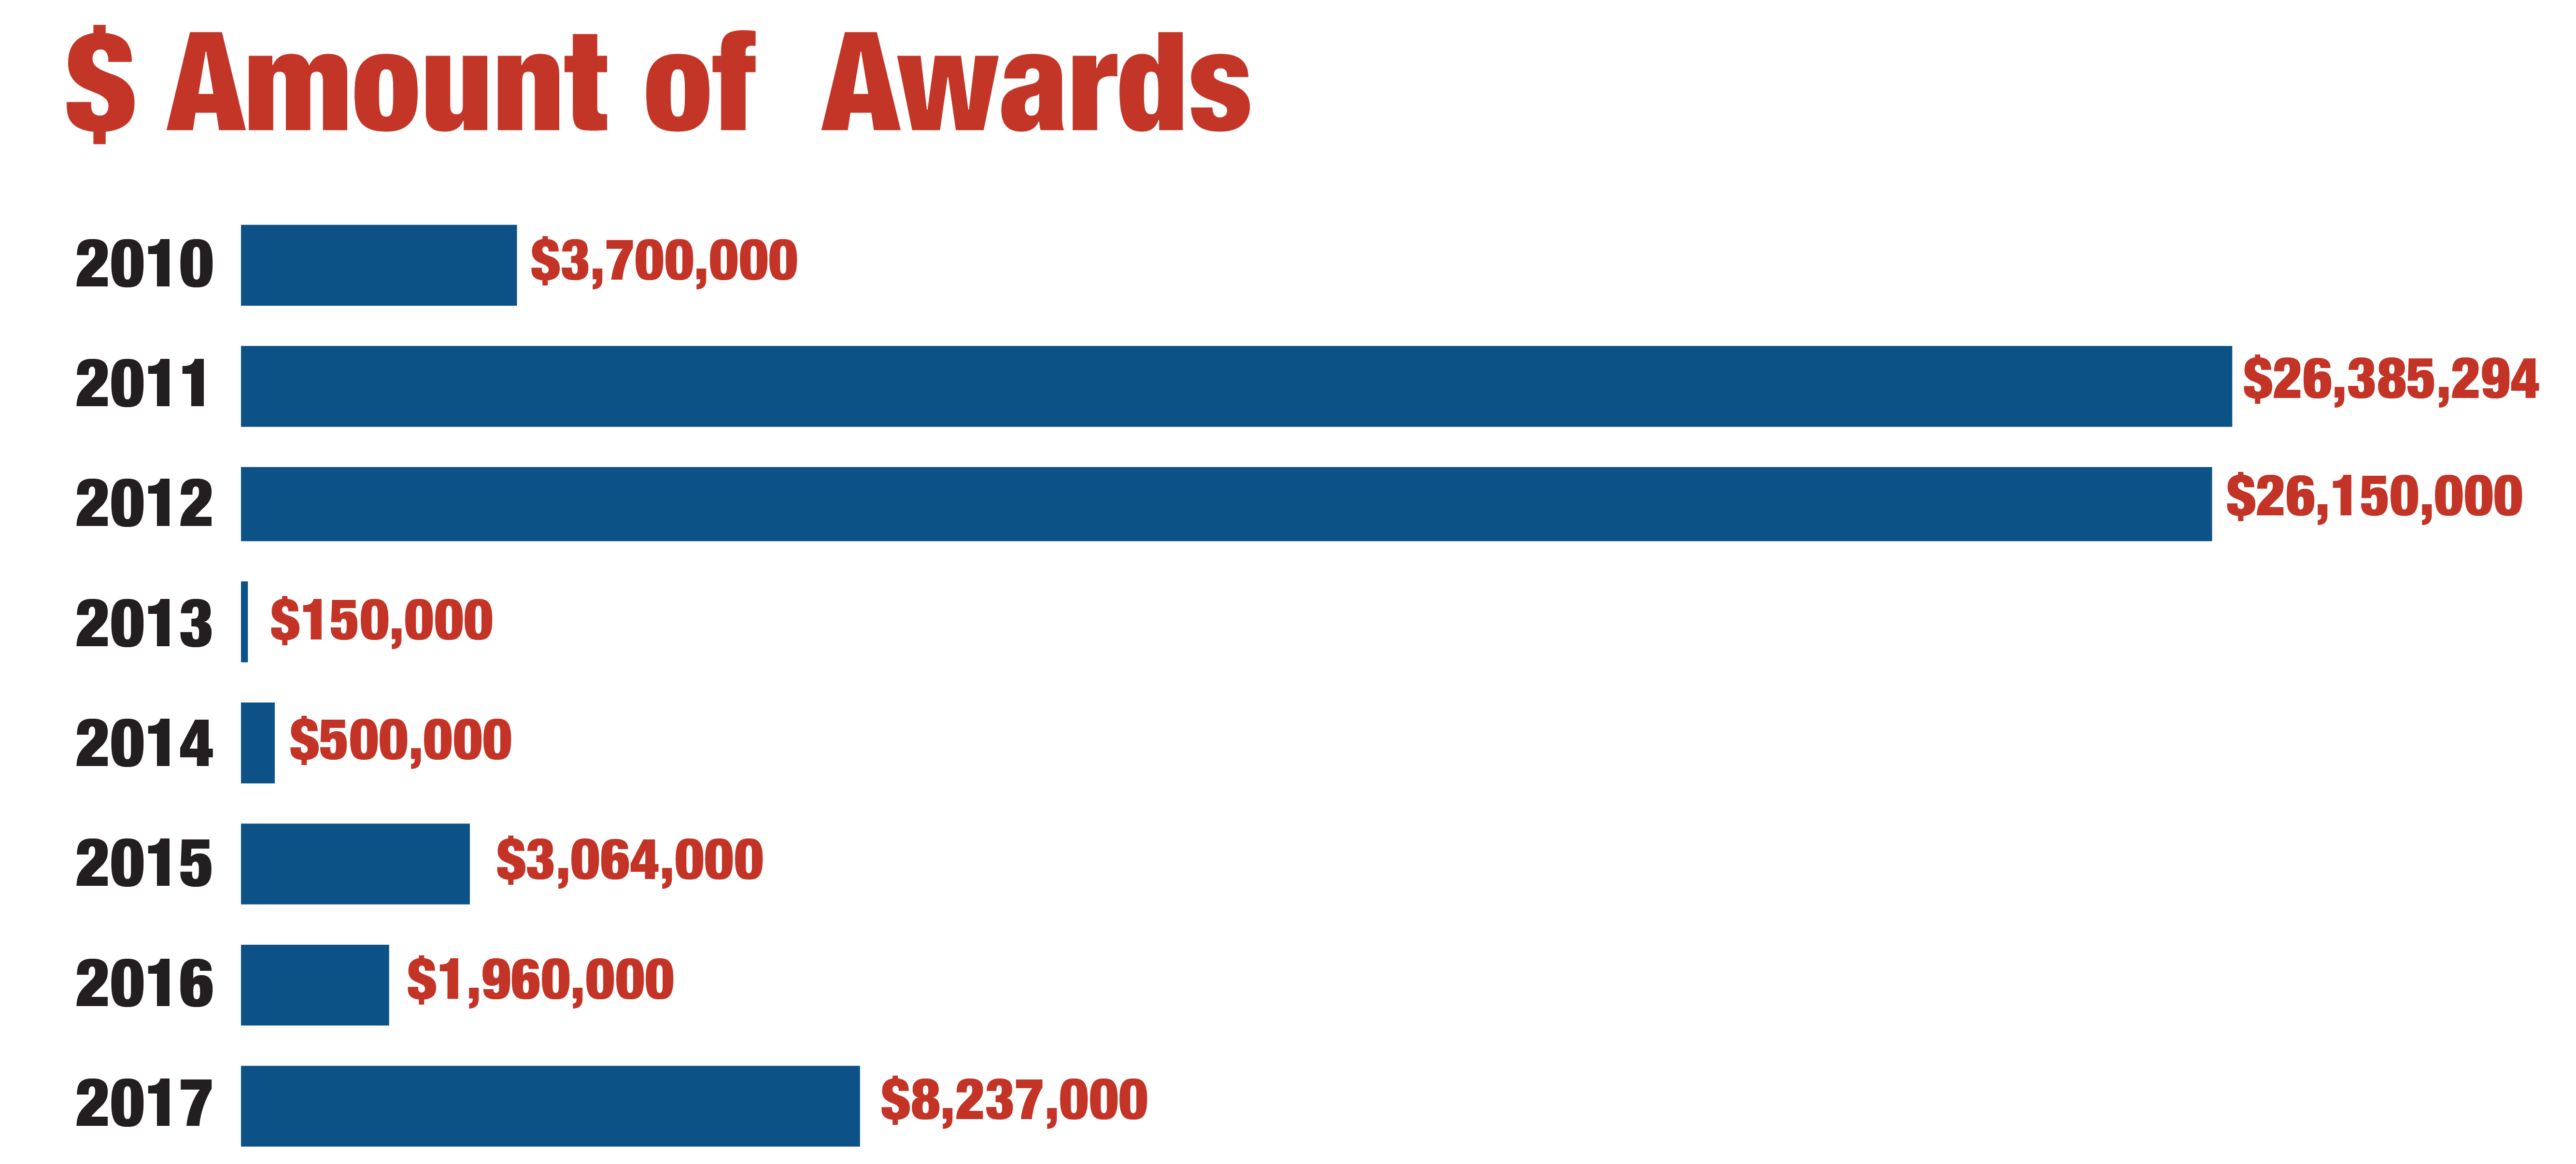 $ amount of awards with ORDC assistance